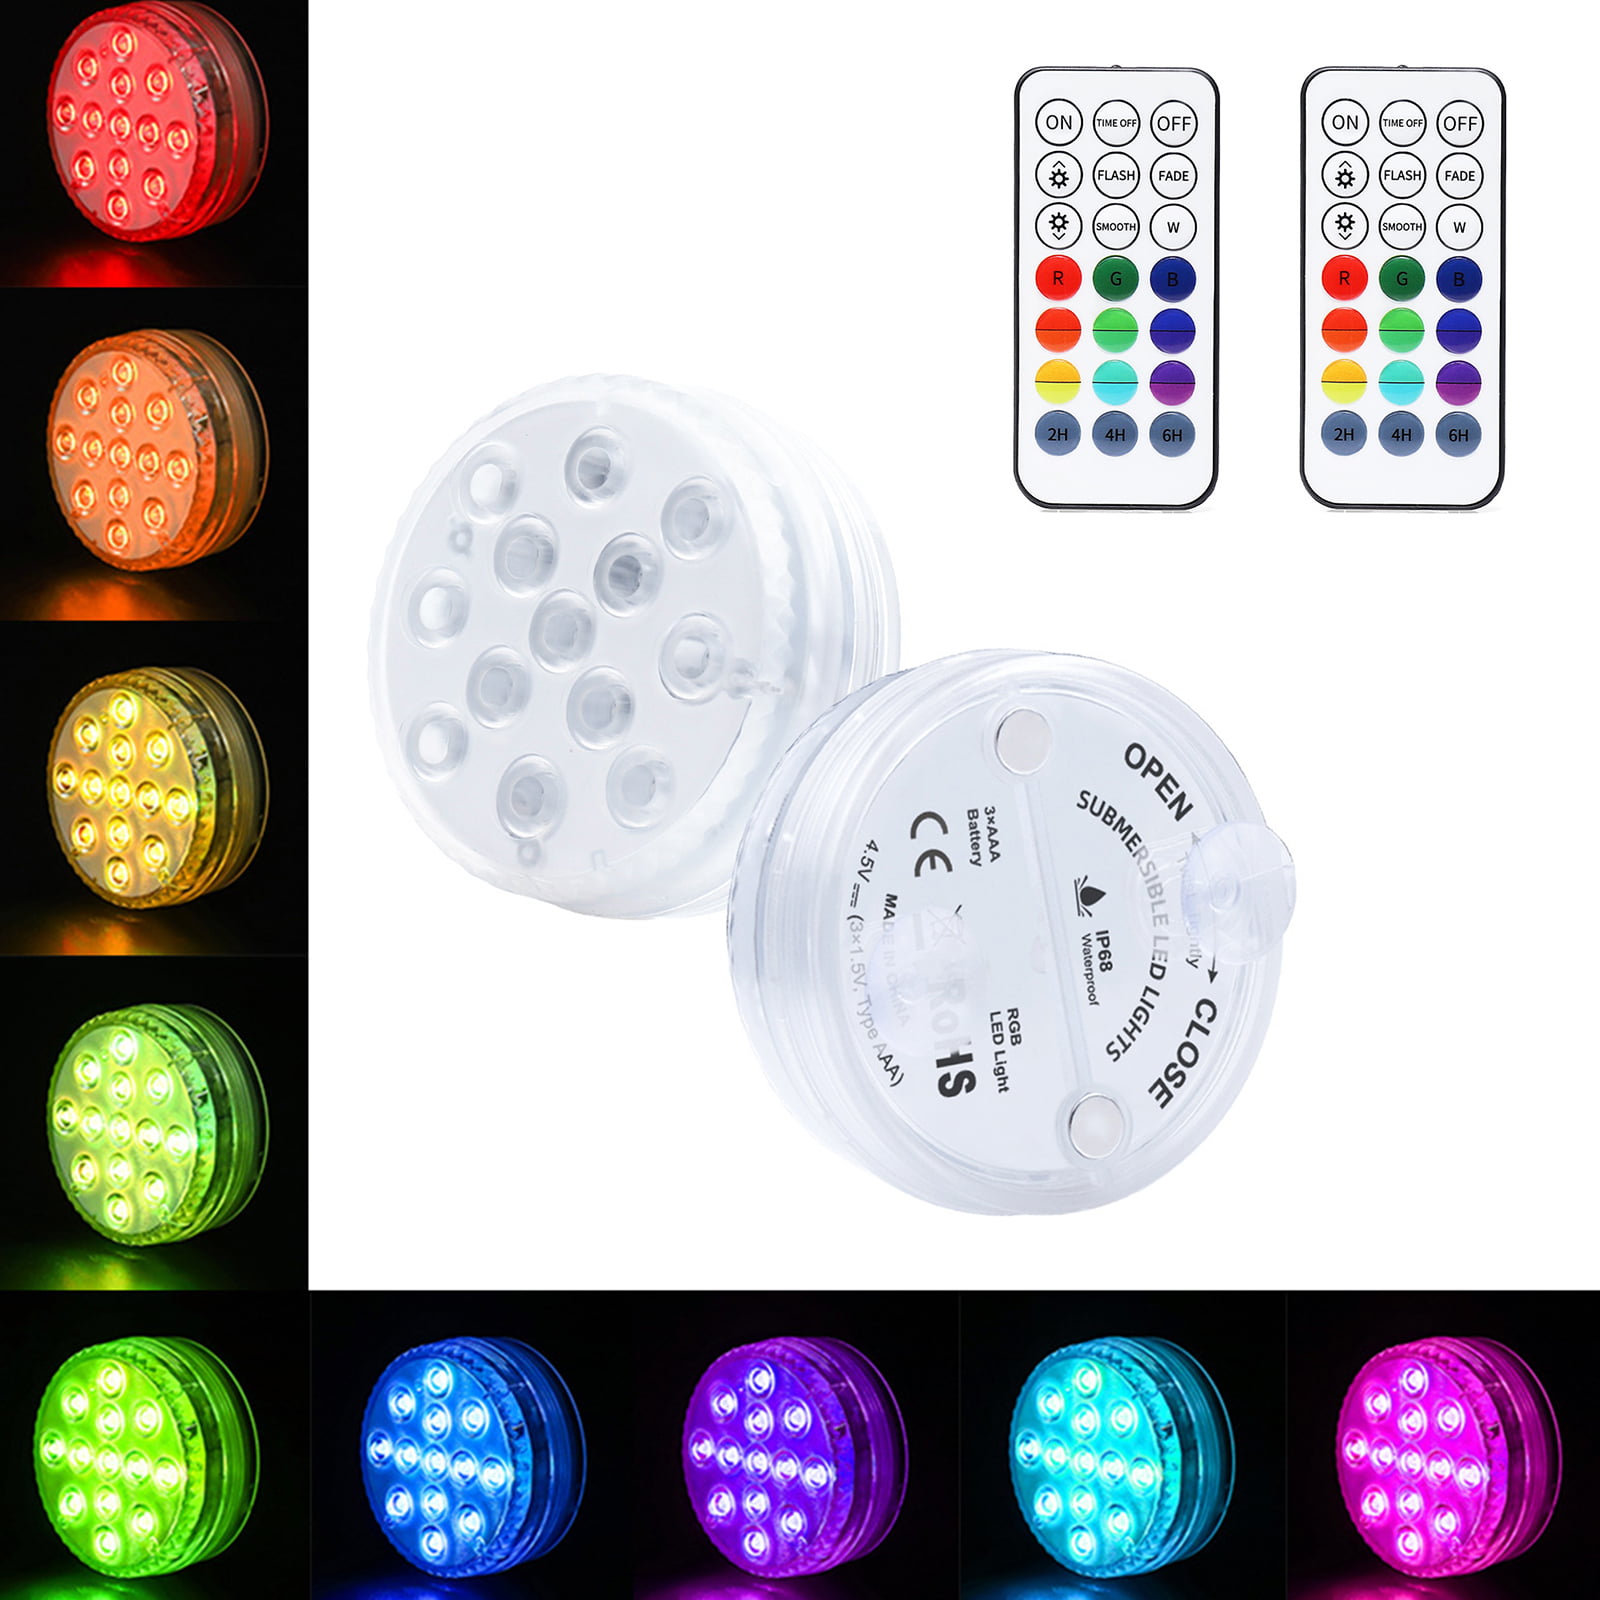 Details about   USA Swimming Pool Light RGB LED Bulb Remote Control Underwater Color Vase Decor 